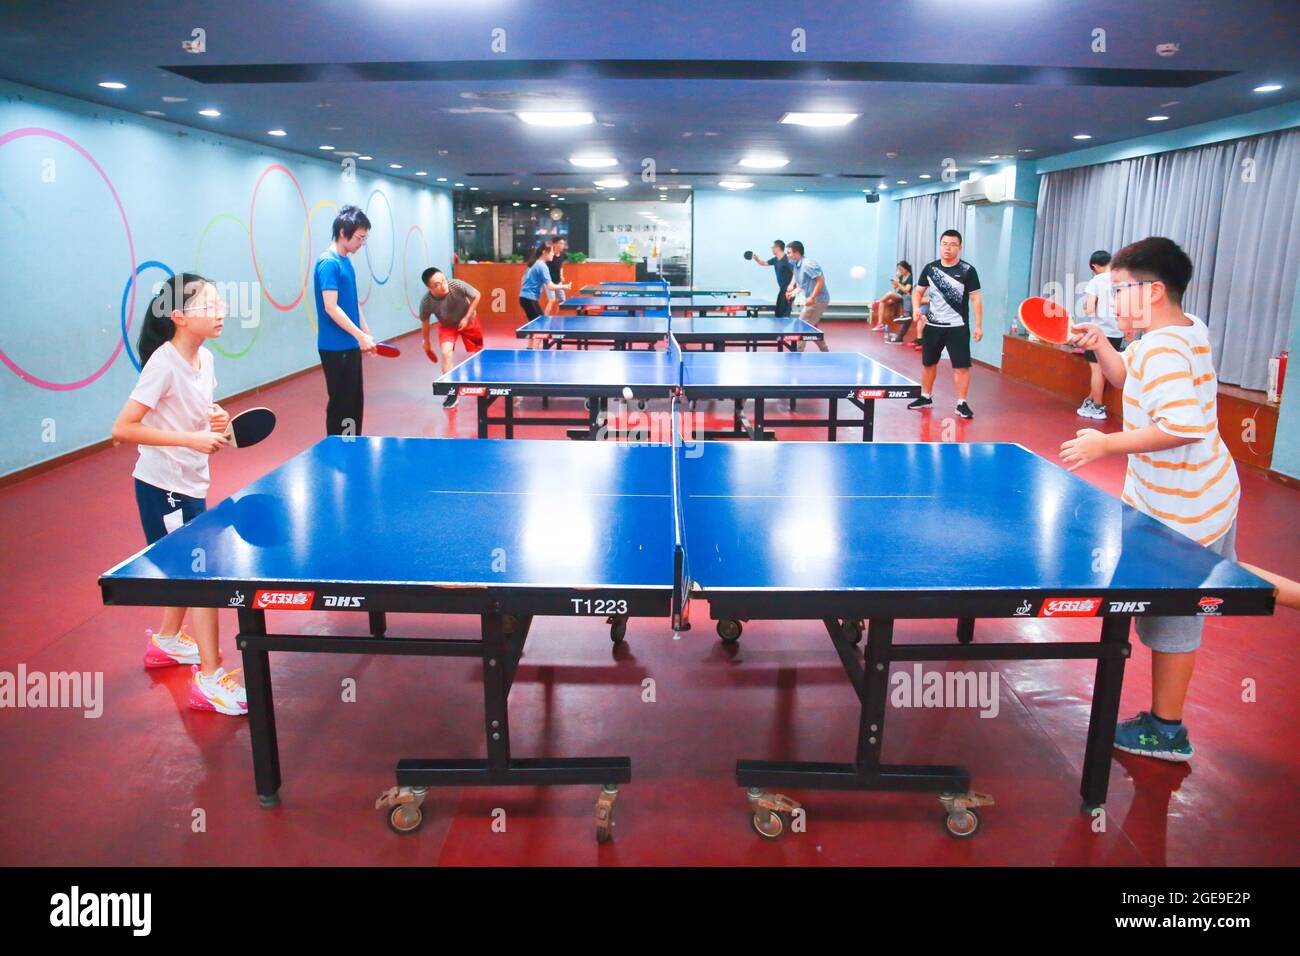 SHANGHAI, CHINA - AUGUST 12, 2020 - Children play table tennis in Shanghai,  China, Aug. 12, 2021. August 16, 2021 - Per capita sports consumption in  China has soared by 30 percent,